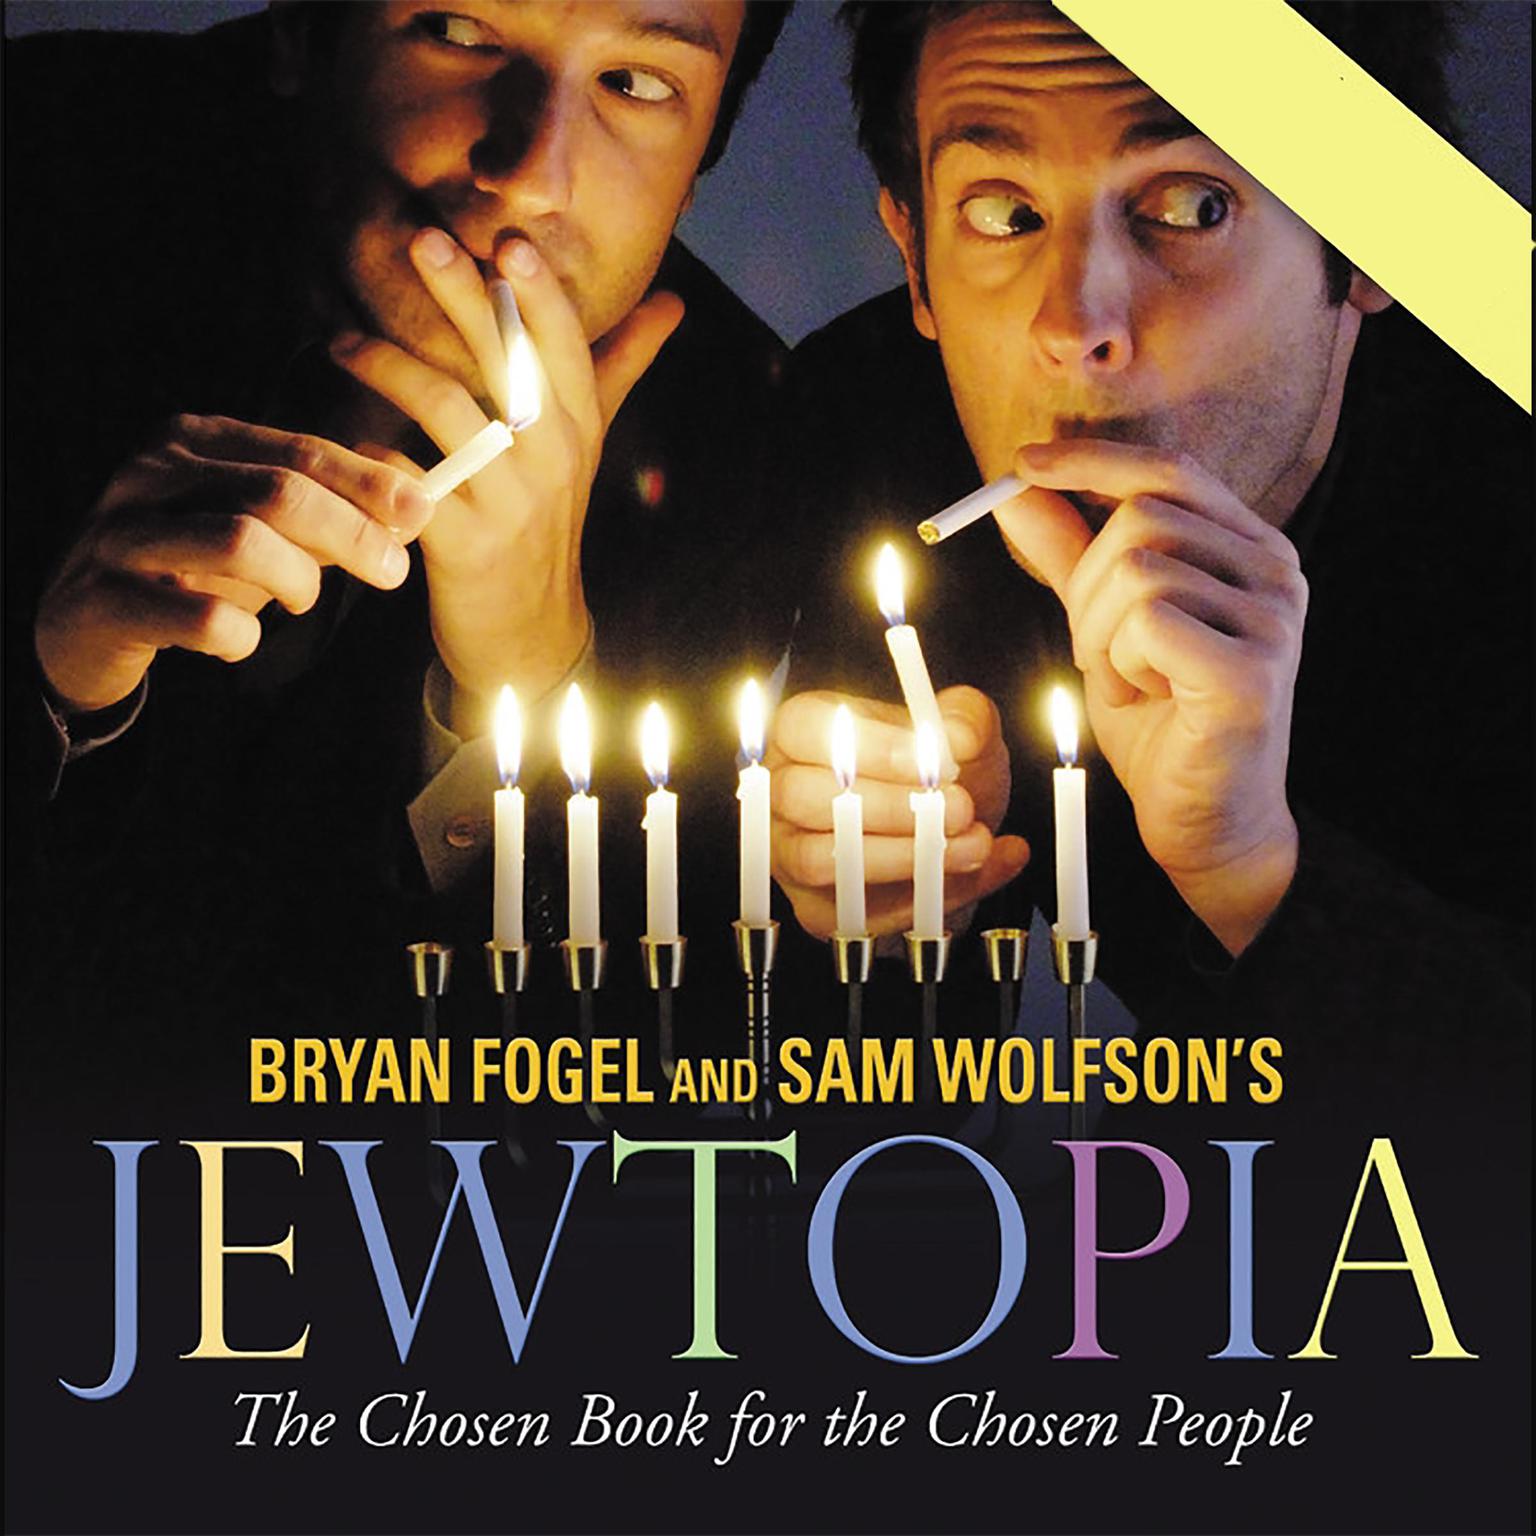 Jewtopia (Abridged): The Chosen Book for the Chosen People Audiobook, by Bryan Fogel